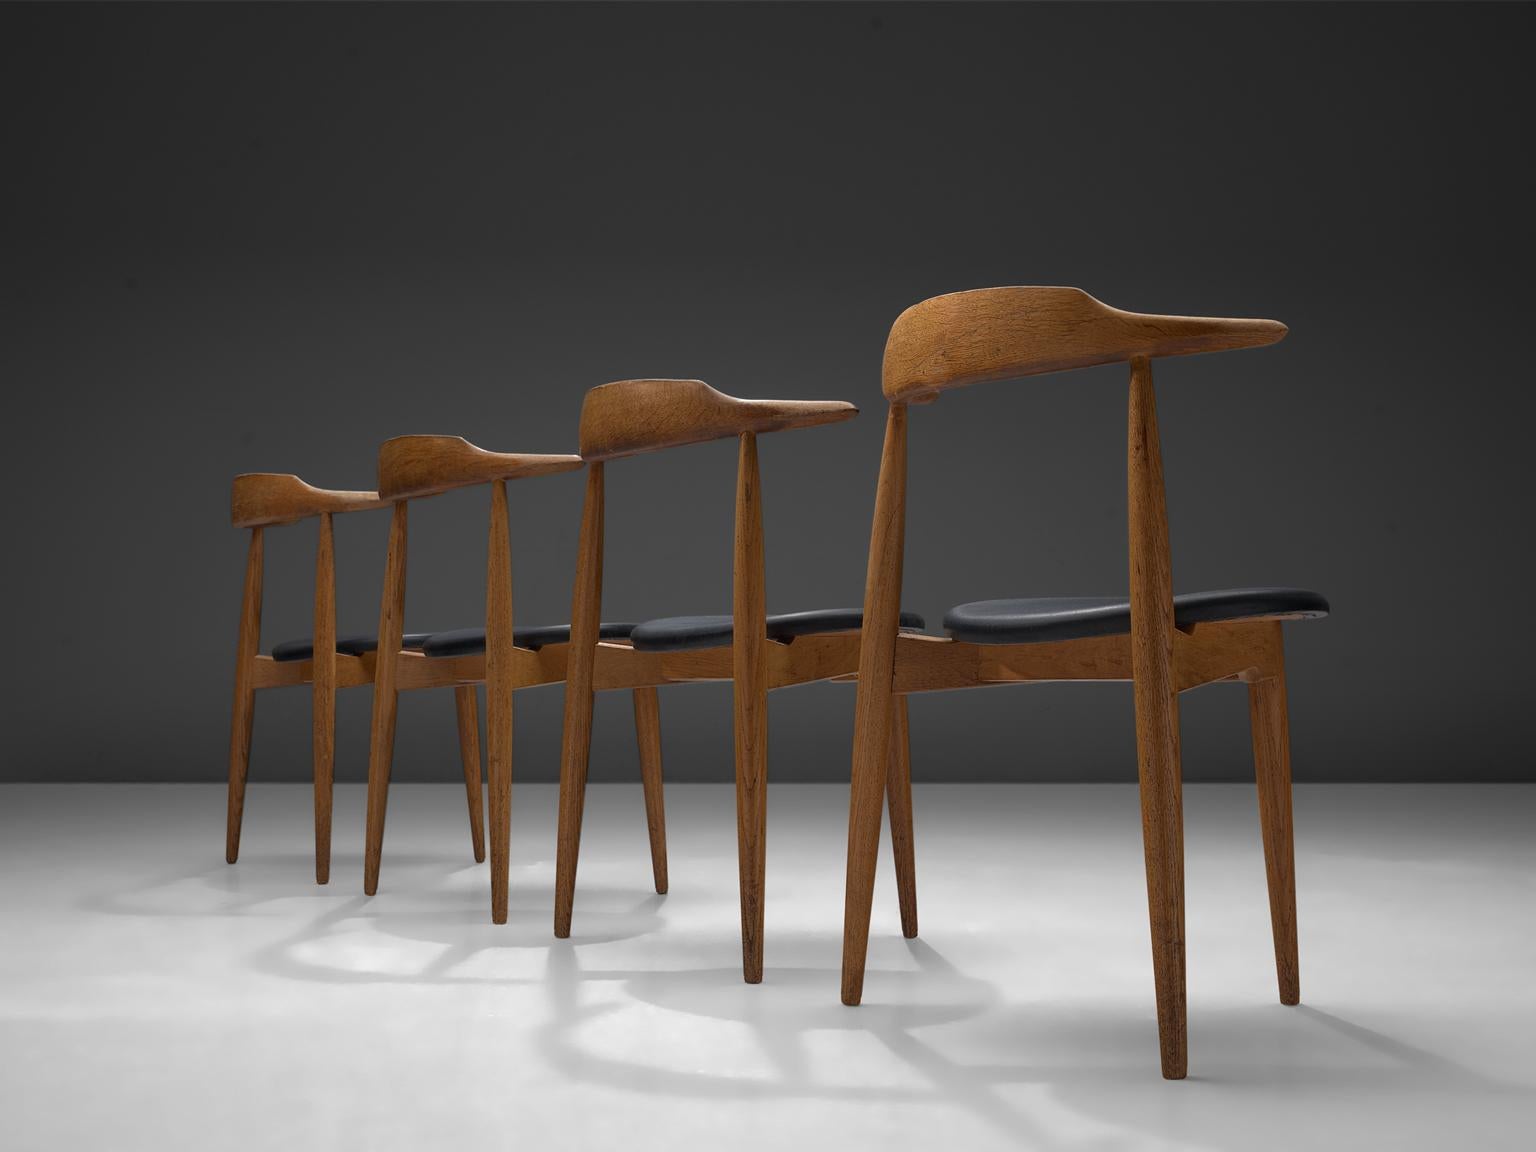 Hans J. Wegner for Fritz Hansen, set of 4 heart chairs FH4103, oak and teak, Denmark, 1953.

These dining chairs are designed by Hans Wegner in 1952. These chairs are designed to take up as little space as possible whilst at the same time having a